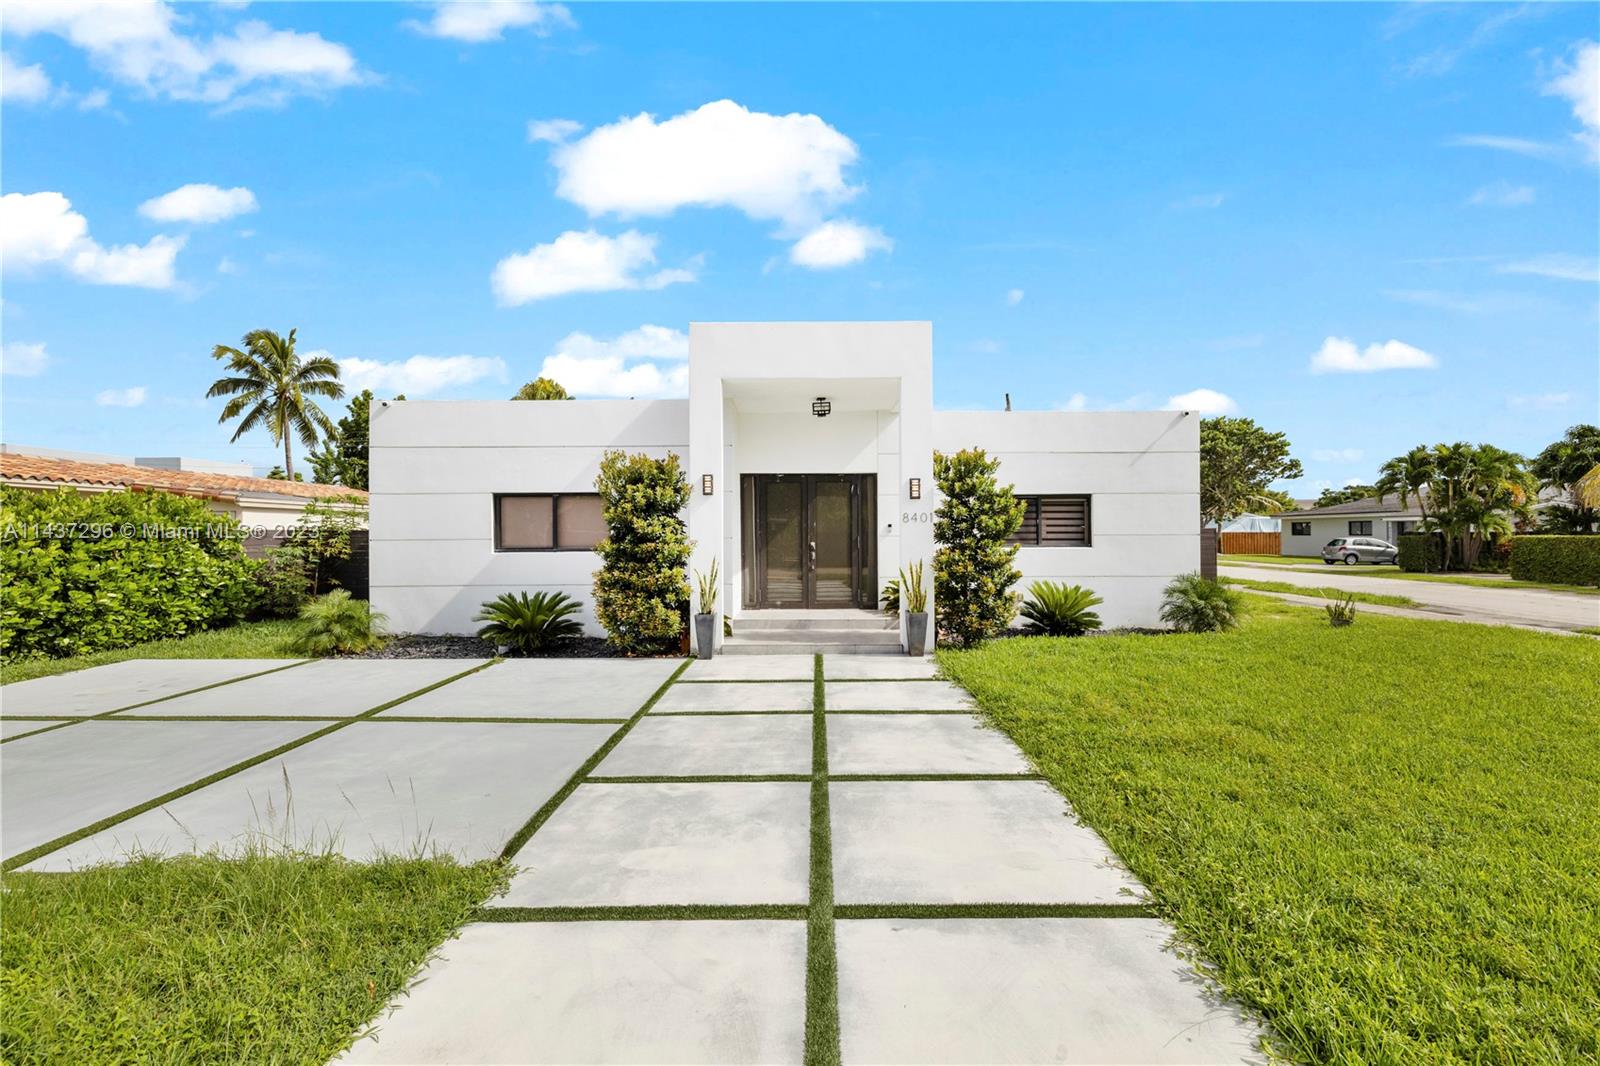 Property for Sale at Address Not Disclosed, Miami, Broward County, Florida - Bedrooms: 5 
Bathrooms: 4  - $1,987,000